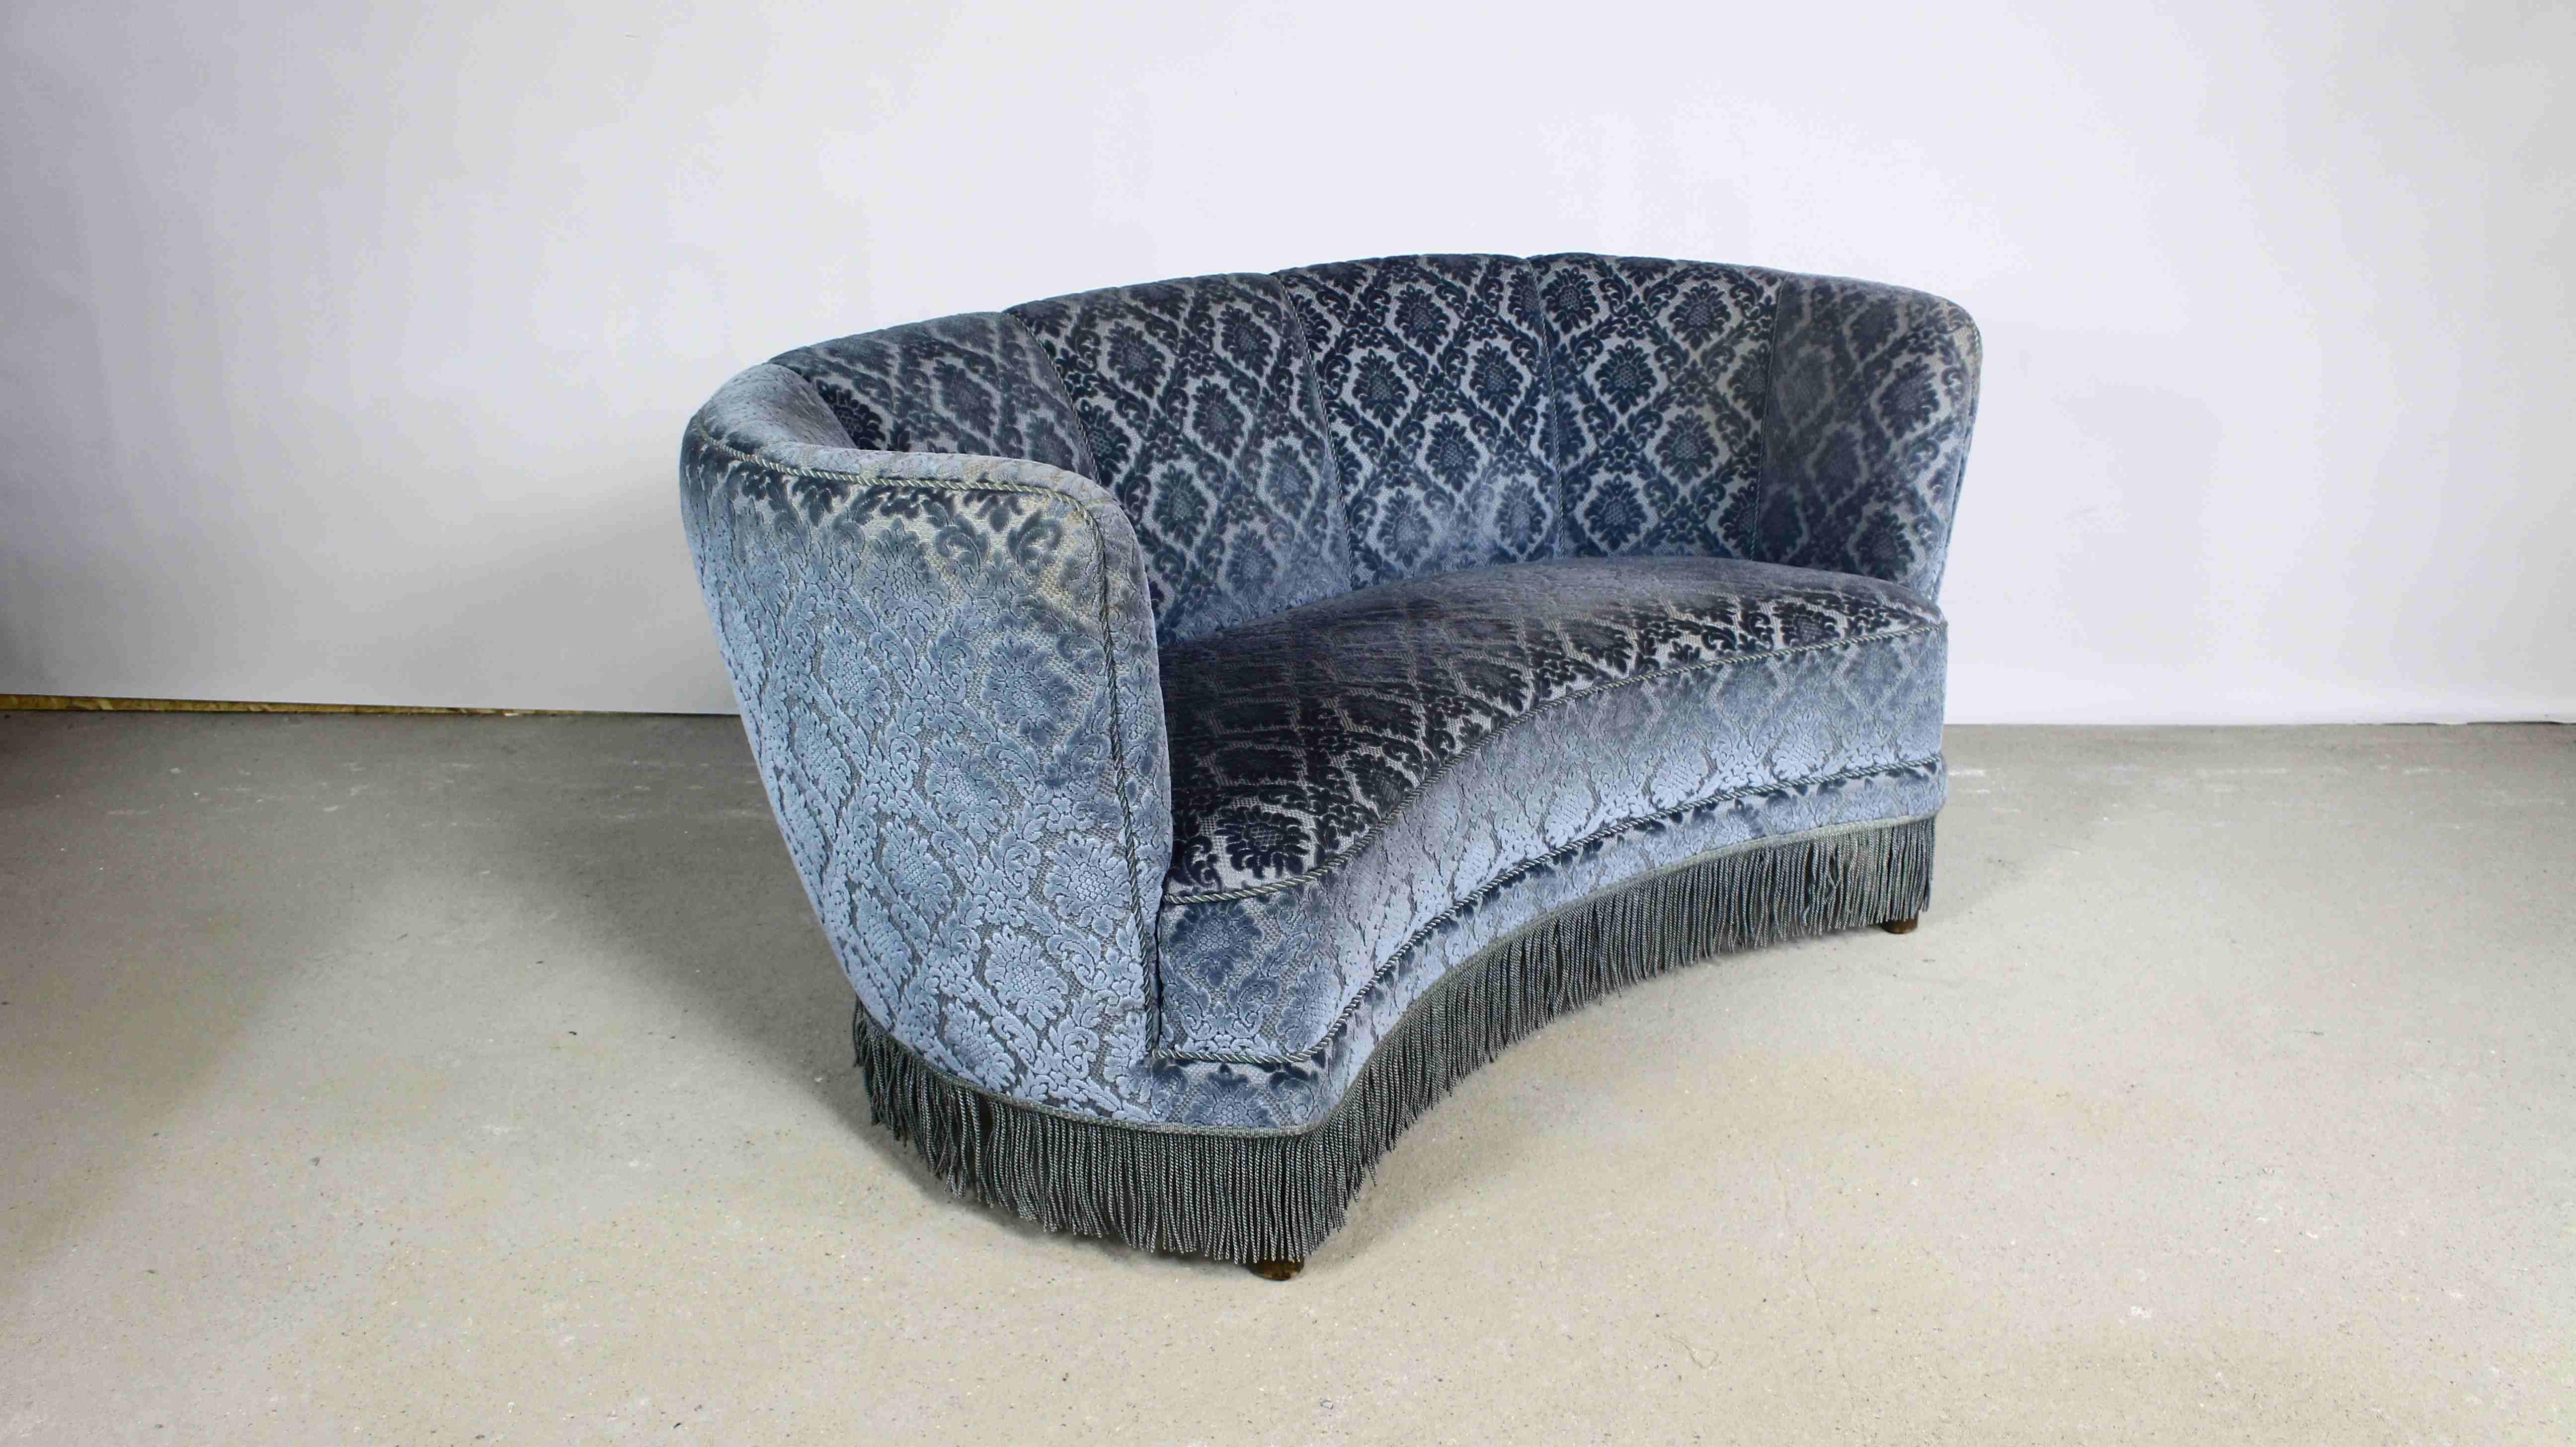 A beautiful round sofa in the art deco style.
Upholstered with blue velvet with an embossed floral motif.
Made in Denmark in the 1950s.
Seat with straps and springs.
Brightened places on the upholstery are the effect of light . In fact, the